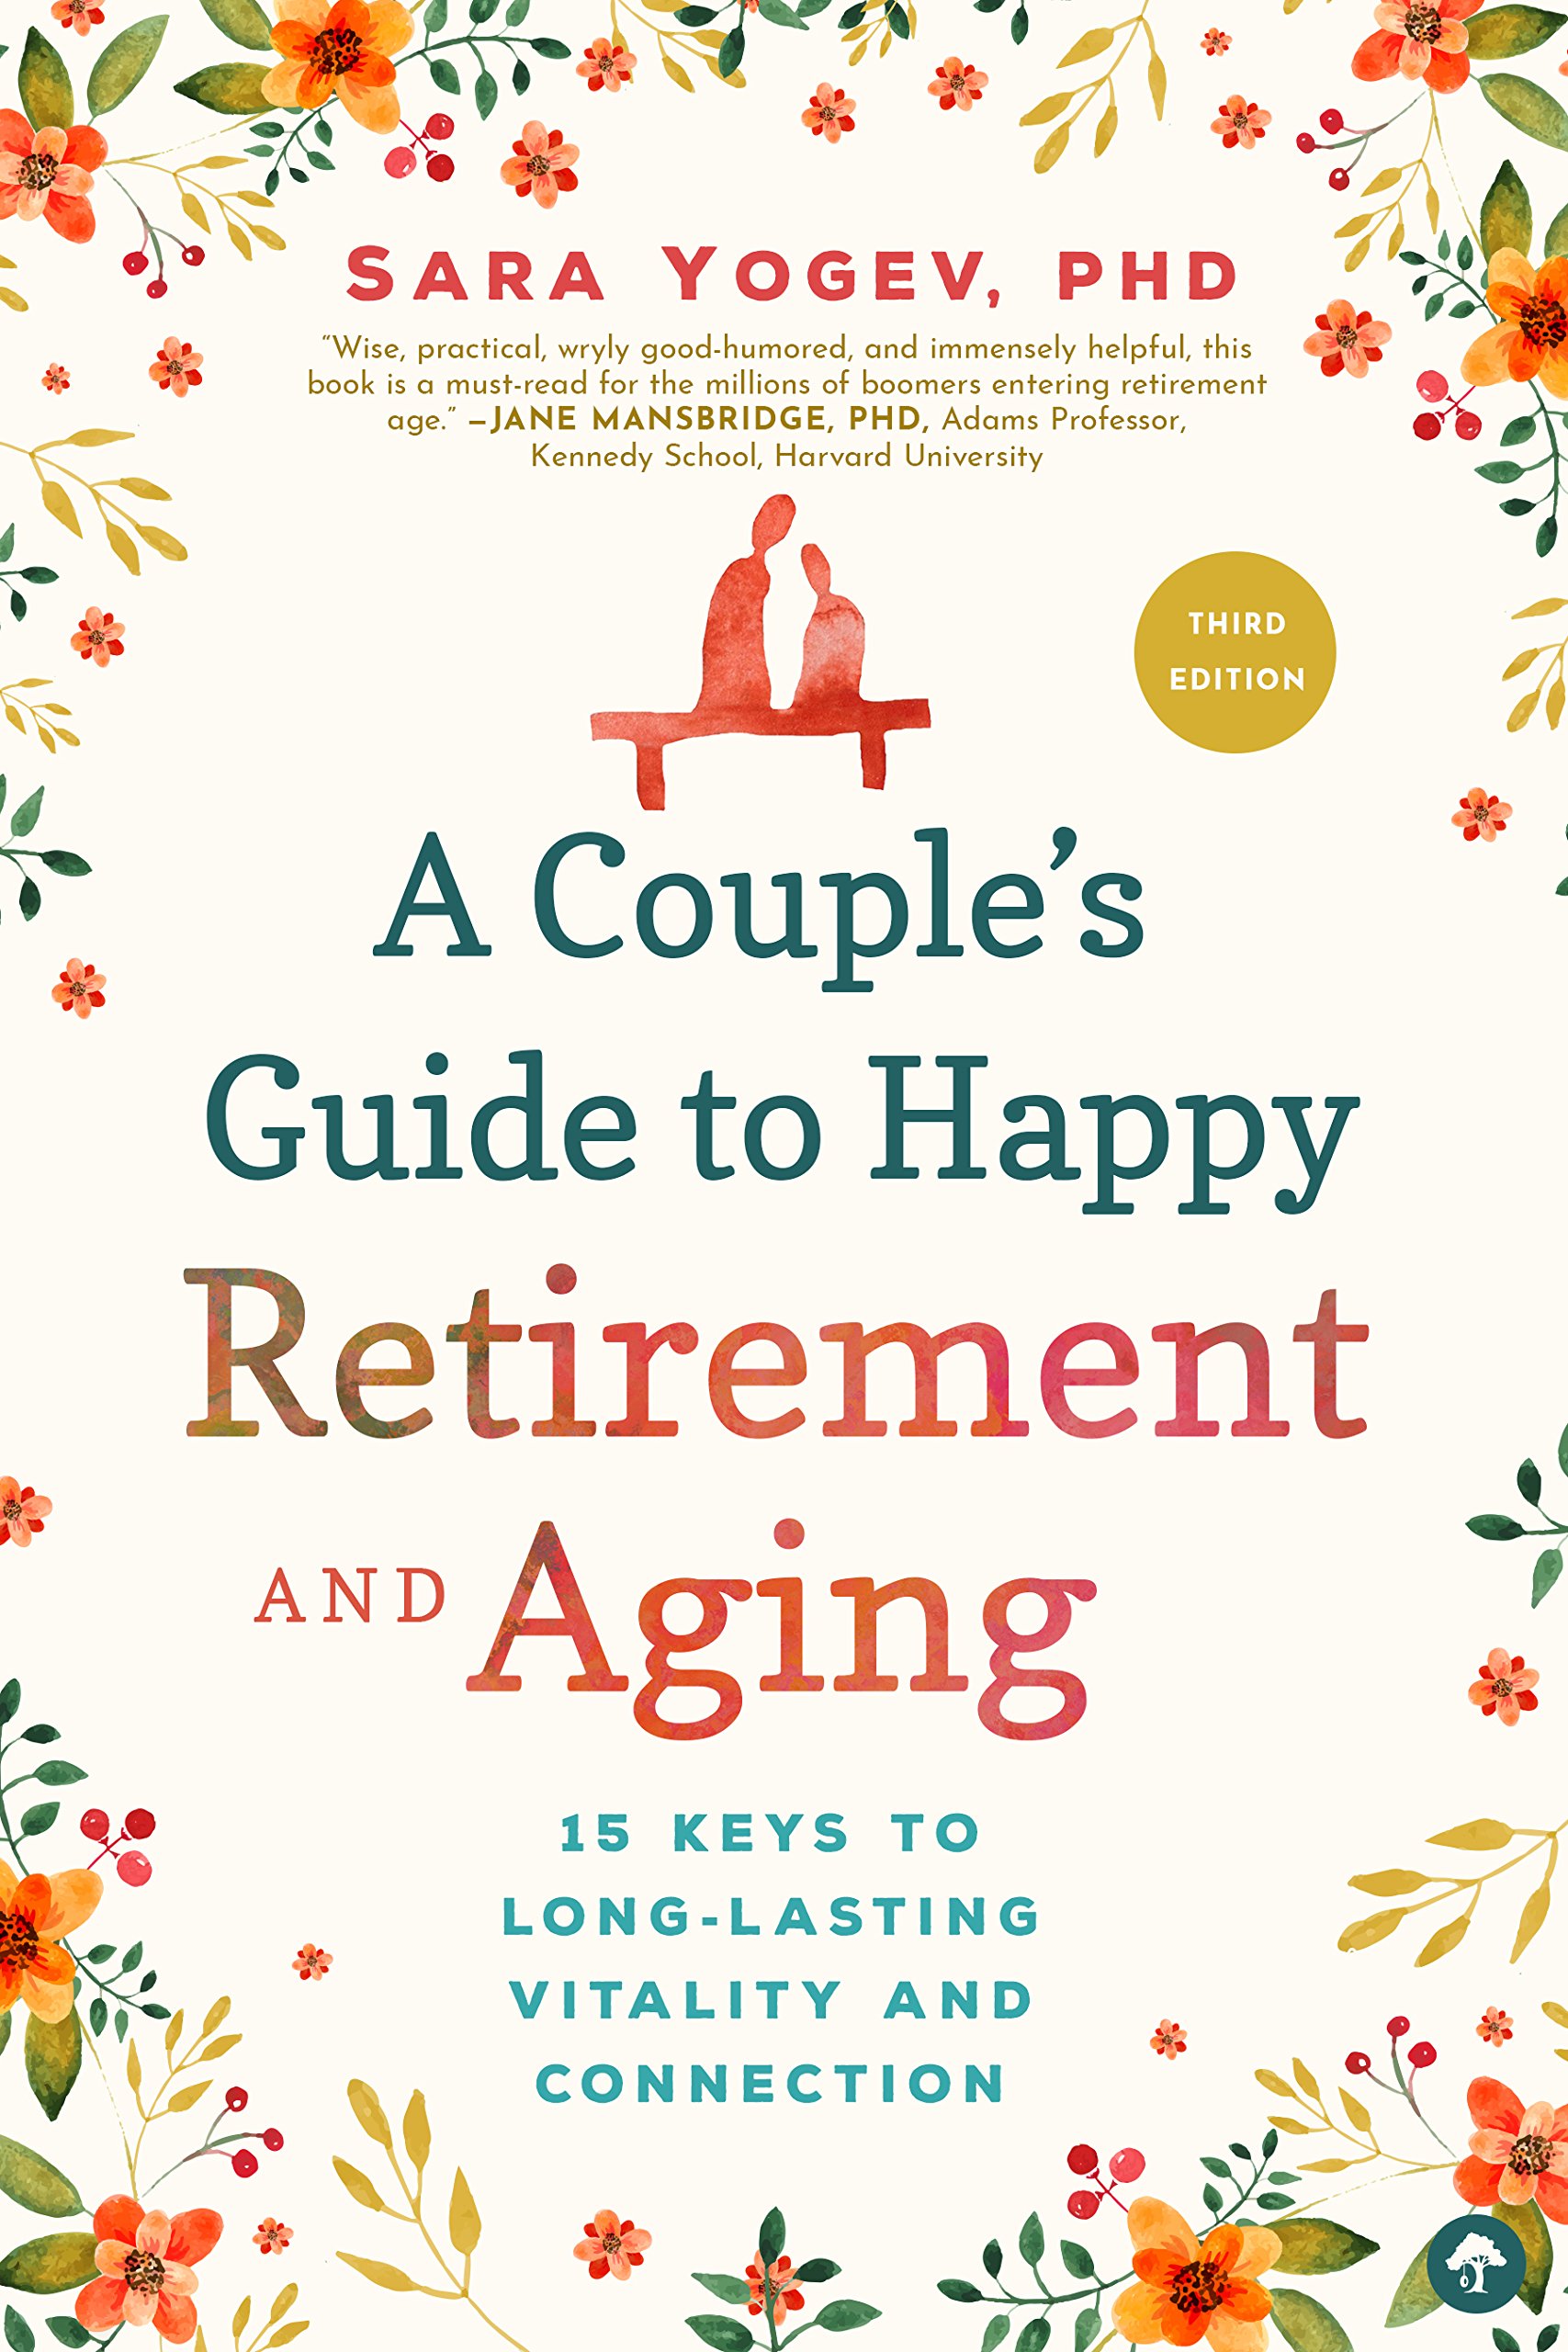 A Couple's Guide to Happy Retirement: 15 Keys to a Lasting Relationship